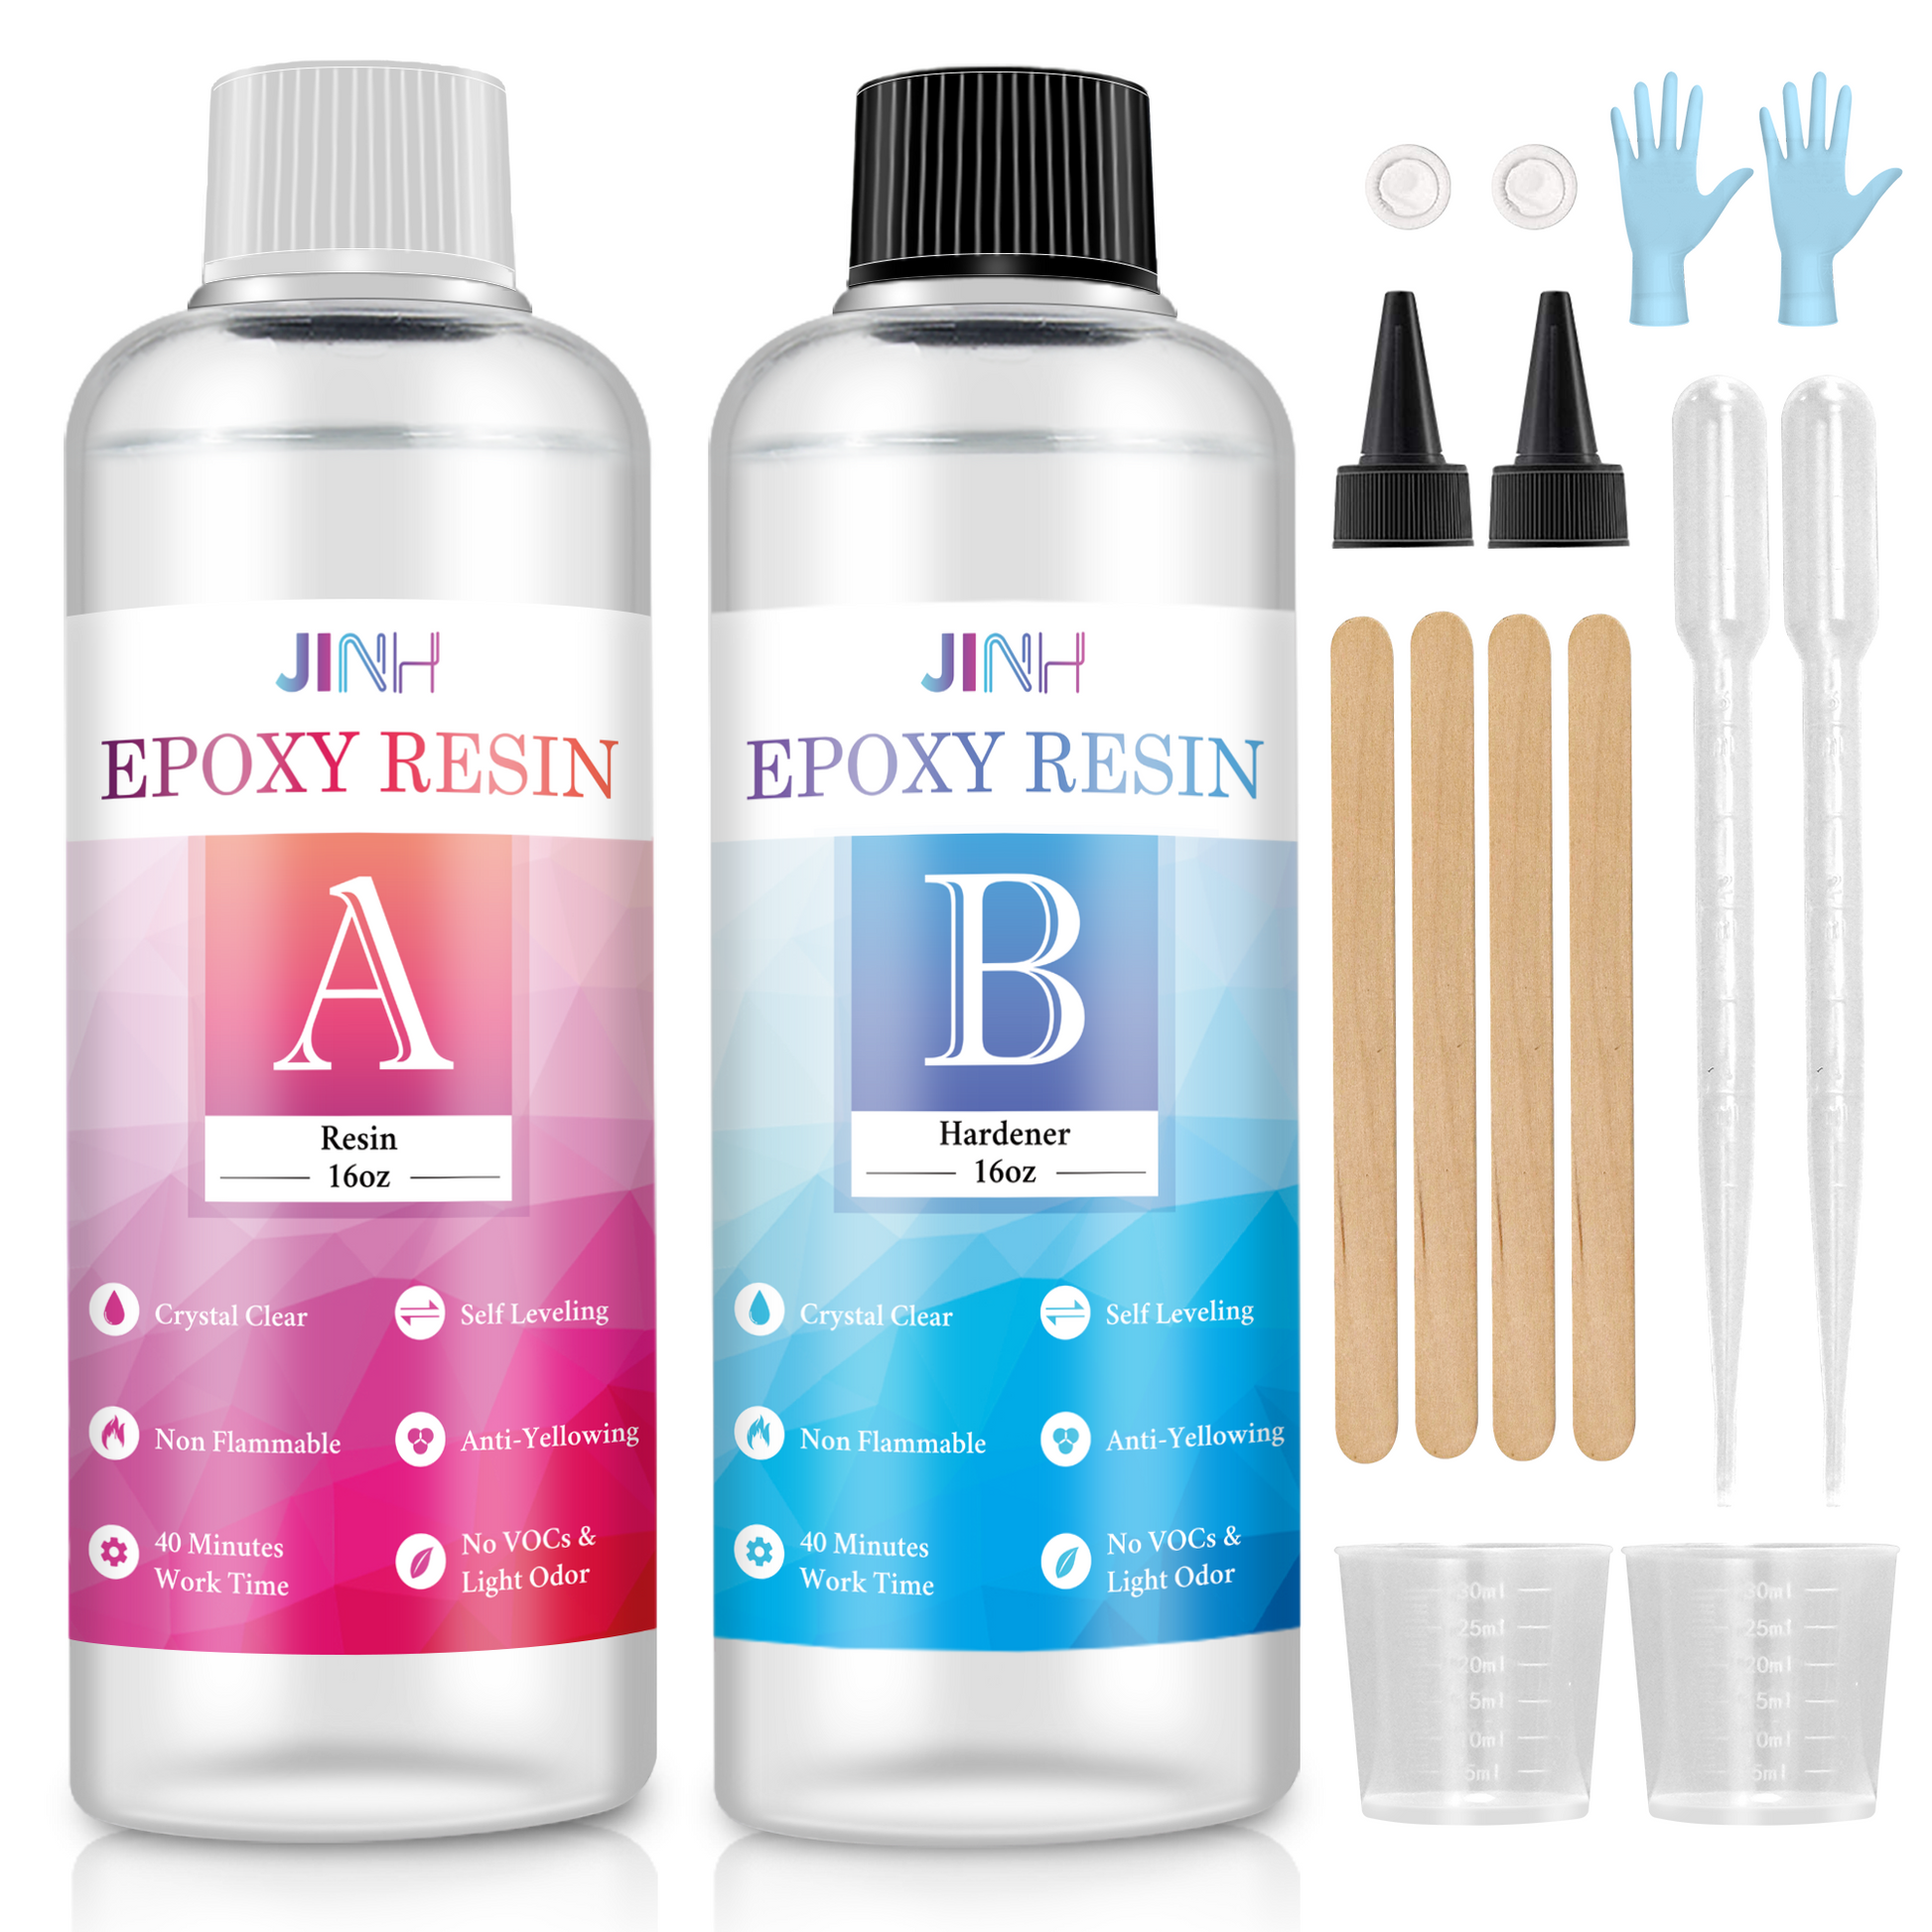 JDiction Crystal Clear Epoxy Resin 16oz, 2 Part Epoxy Casting Resin Kit  with Tools